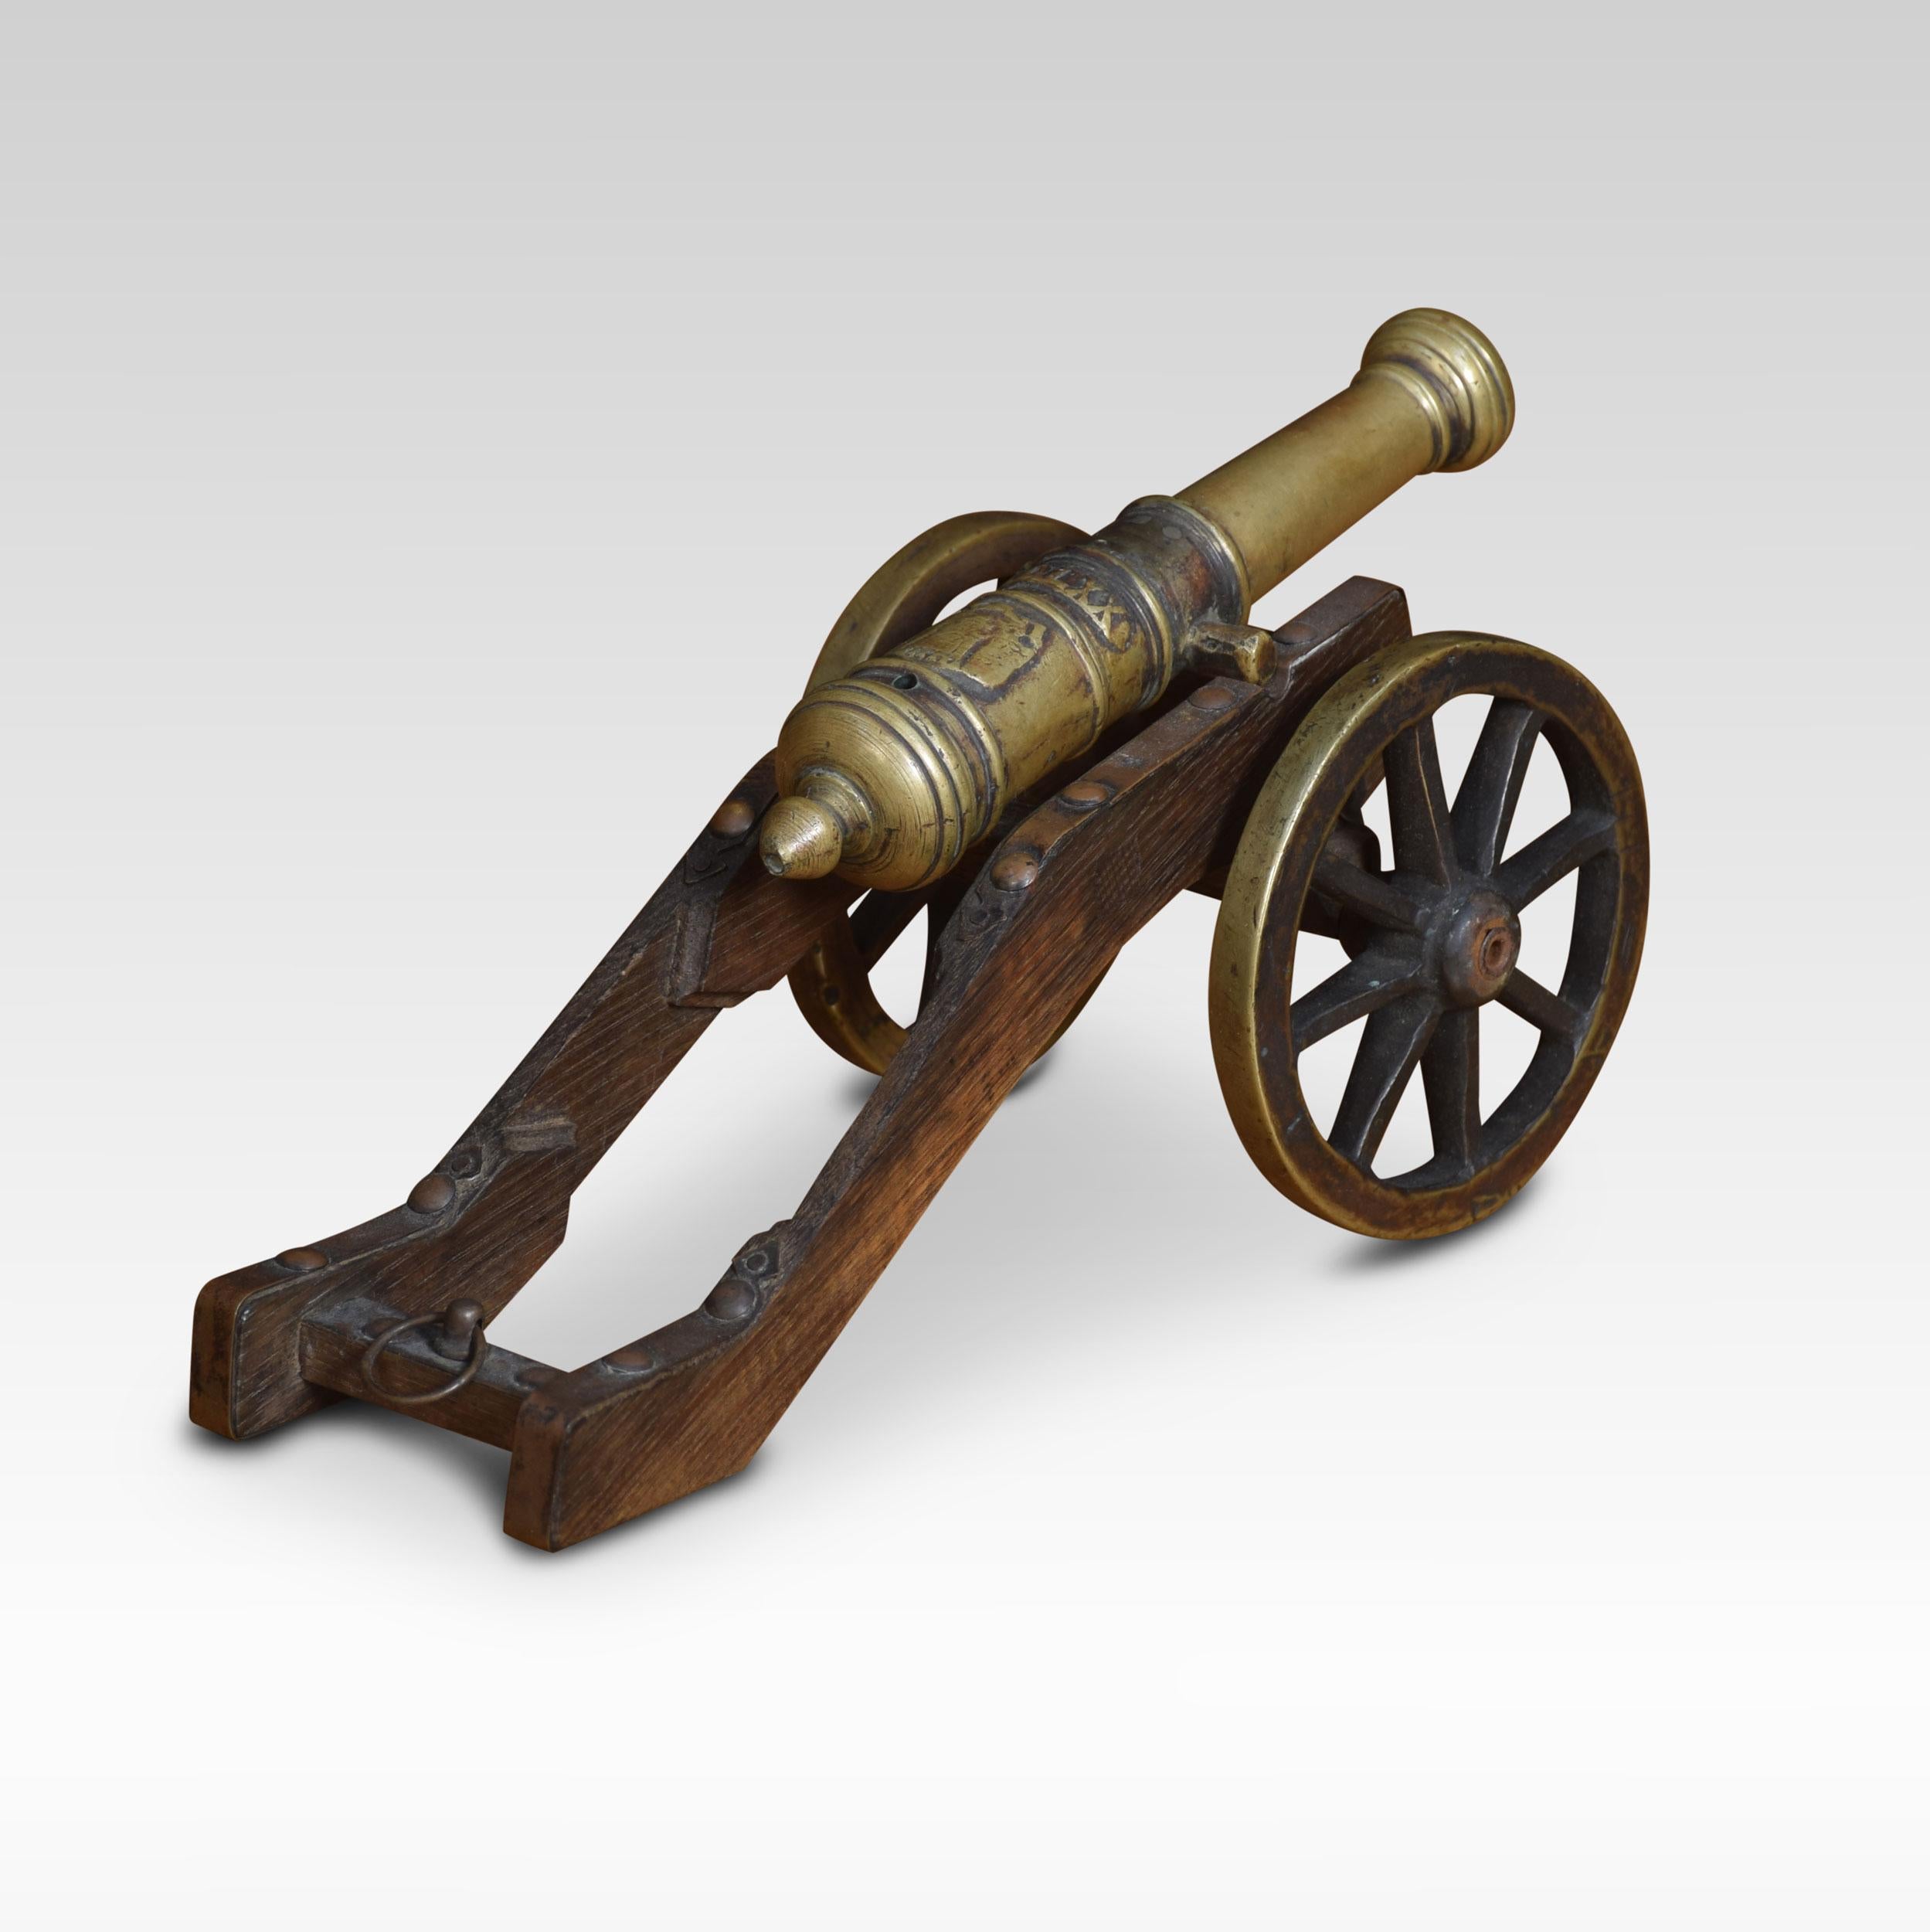 Signal cannon with a bronze barrel mounted on a wooden carriage with spoked wheels. Barrel length 7.5 inches
Dimensions
Height 5.5 inches
Width 5 inches
Depth 11 inches.